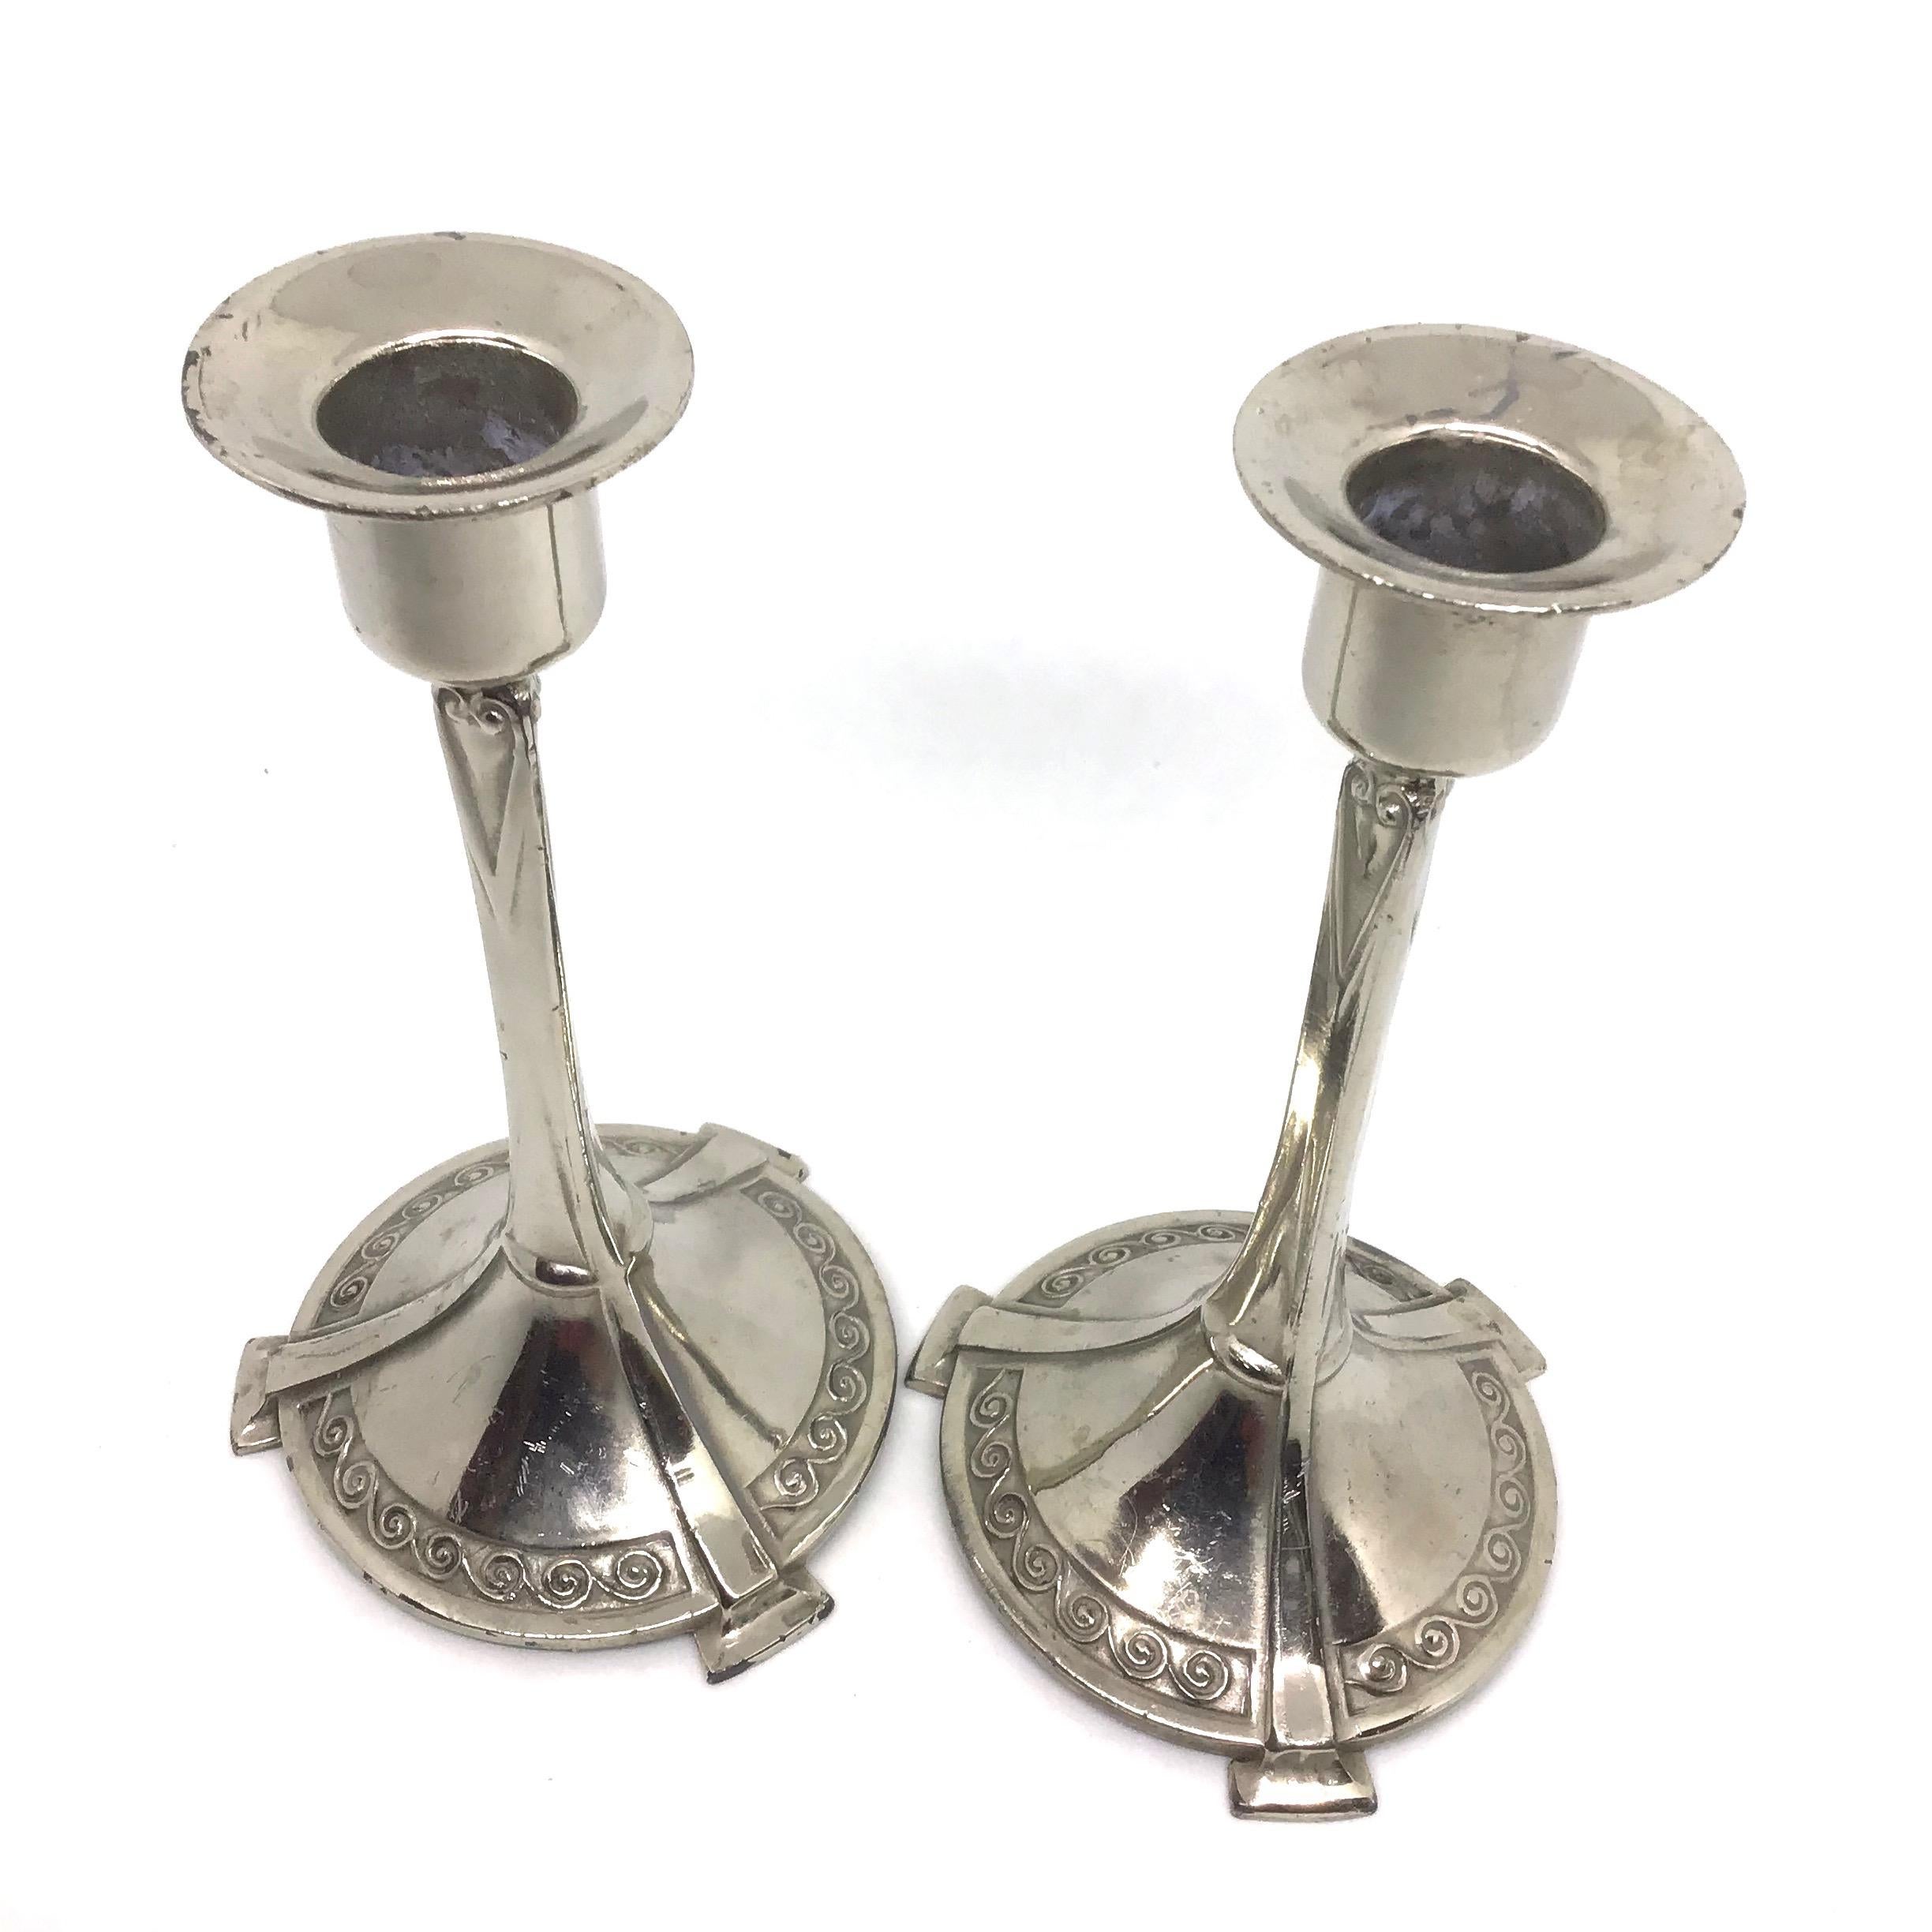 Plated Pair of Art Nouveau Candlesticks Candleholders Antique, German, 1900s For Sale